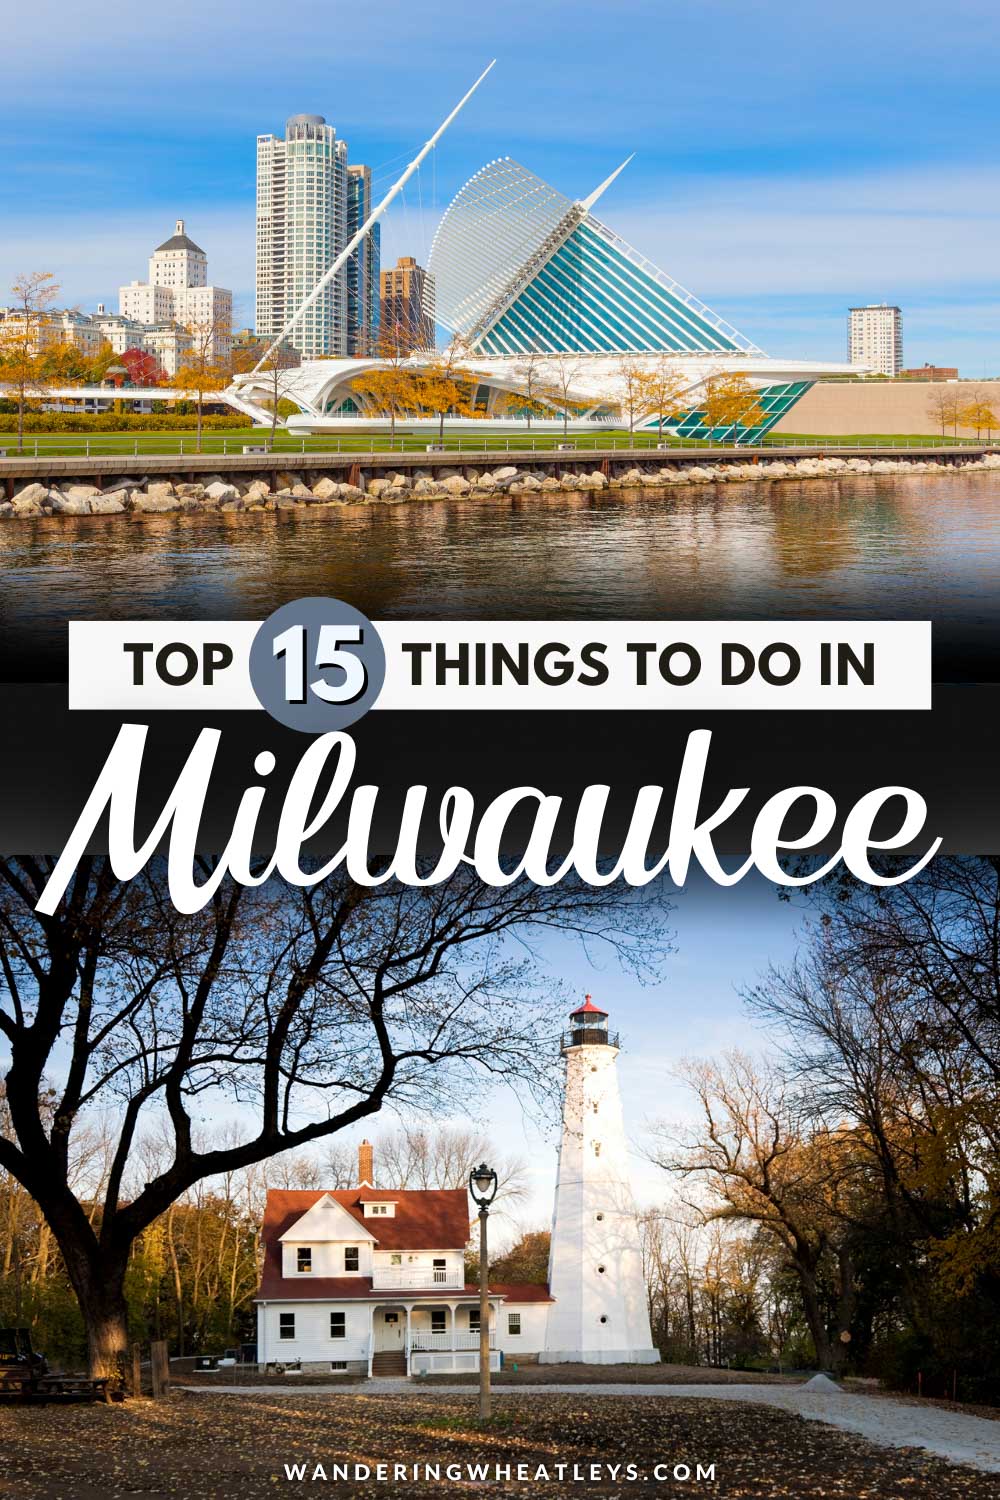 The Best Things to do in Milwaukee, Wisconsin